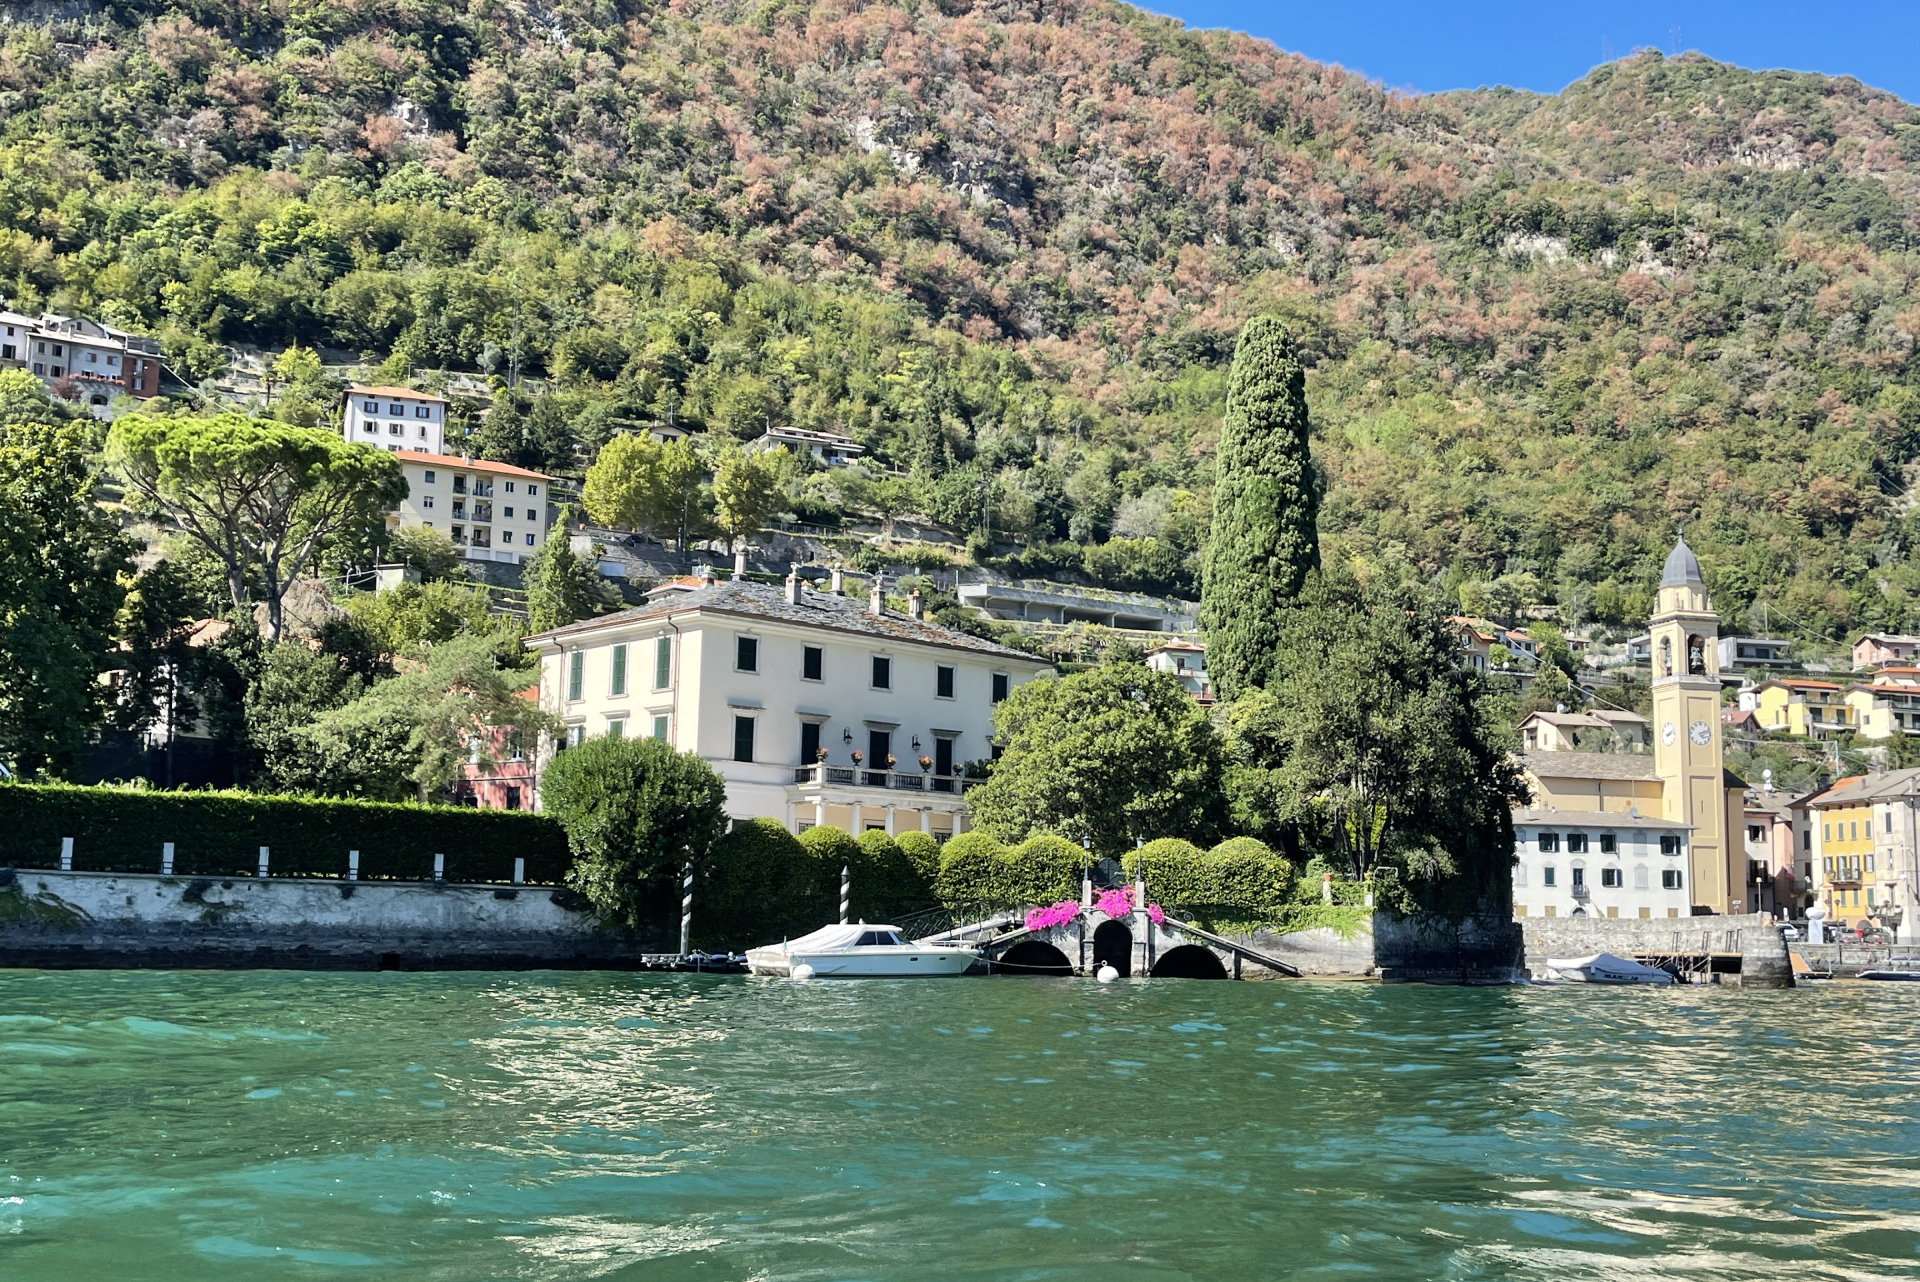 Real Estate Investment in Lake Como